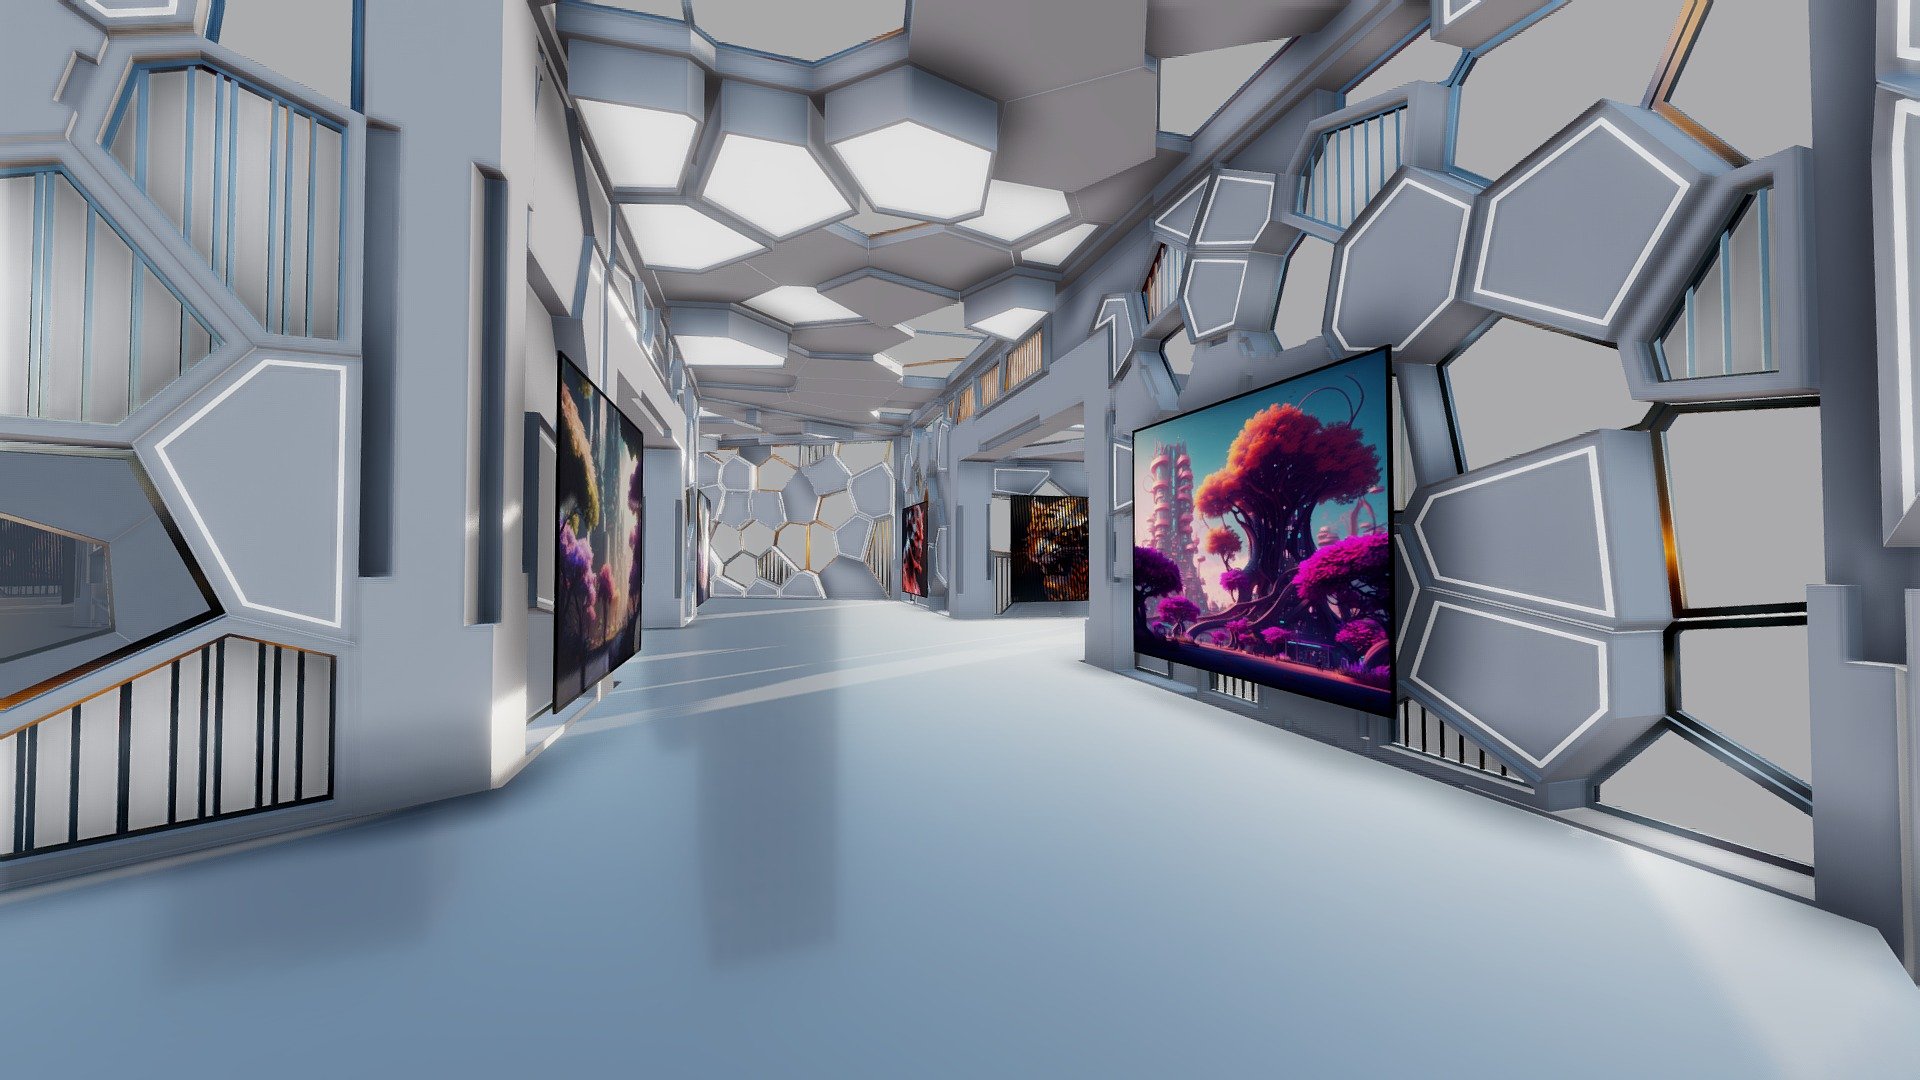 Futuristic Interior Gallery.
Just add your art work to the screens.
Enjoy!
Compatible with spacial.io - Sci-Fi_Interior_Gallery - Buy Royalty Free 3D model by Giimann 3d model